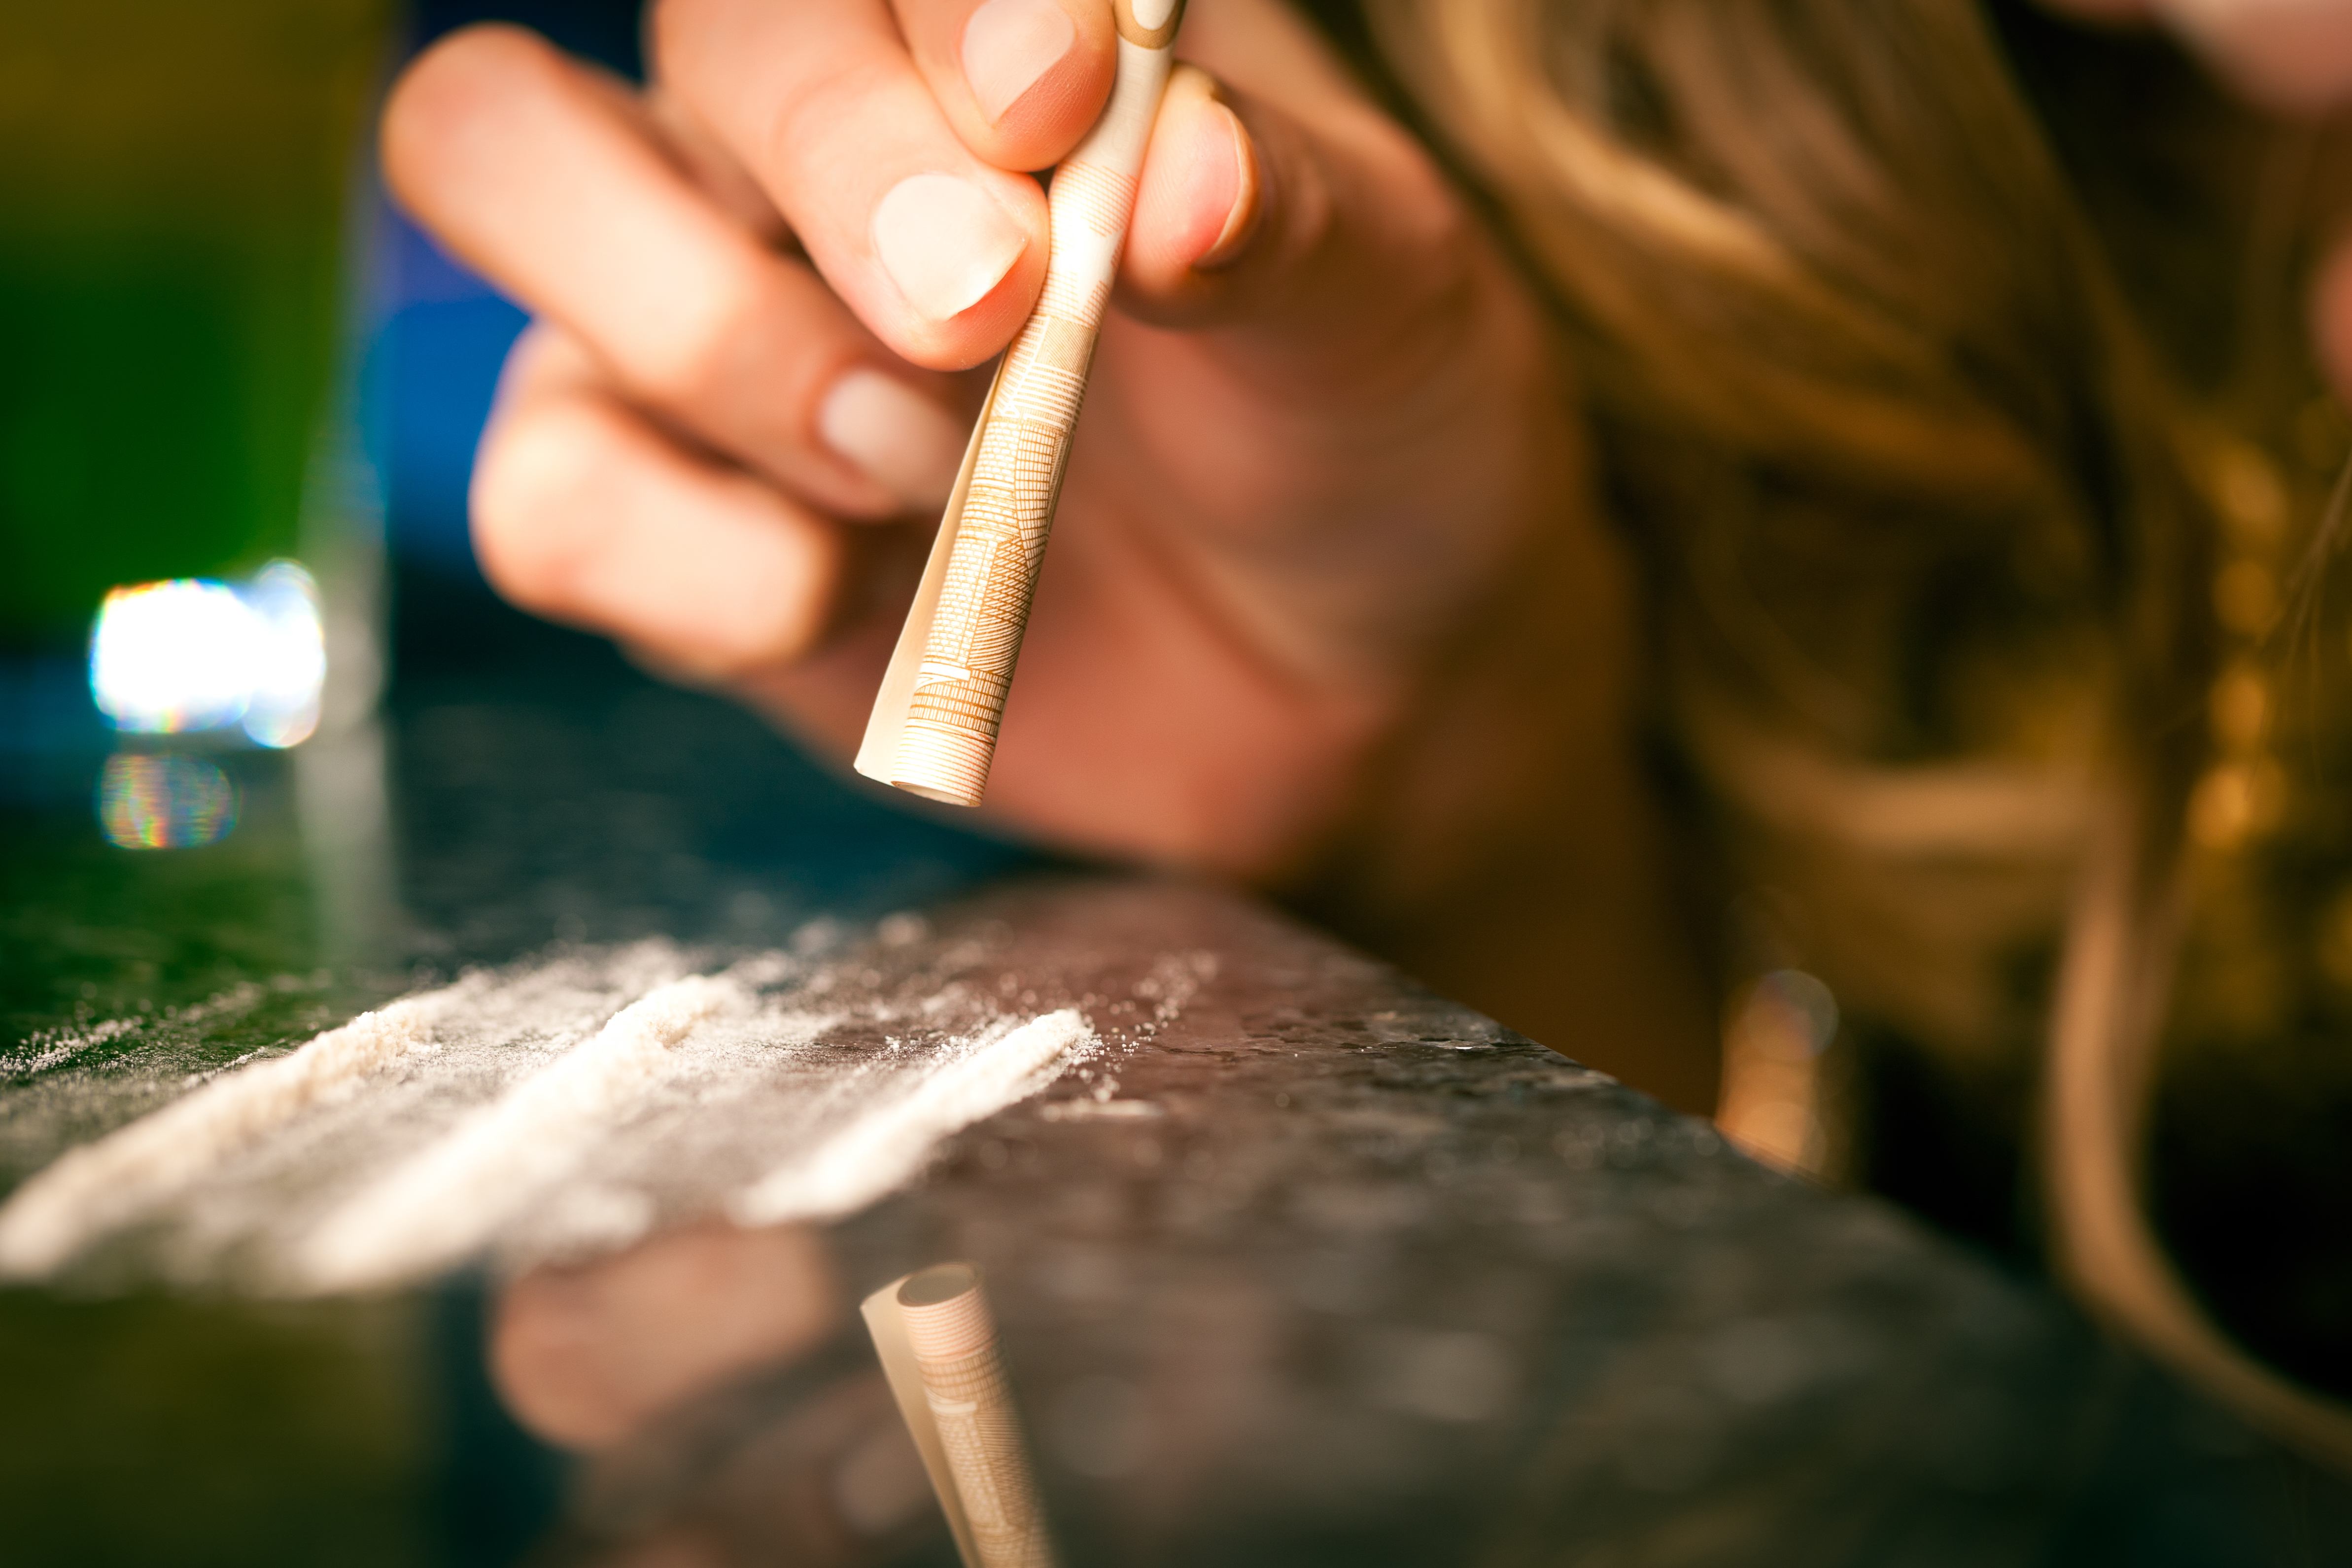 More cocaine is being used in Canada amid drug overdose crisis, data shows